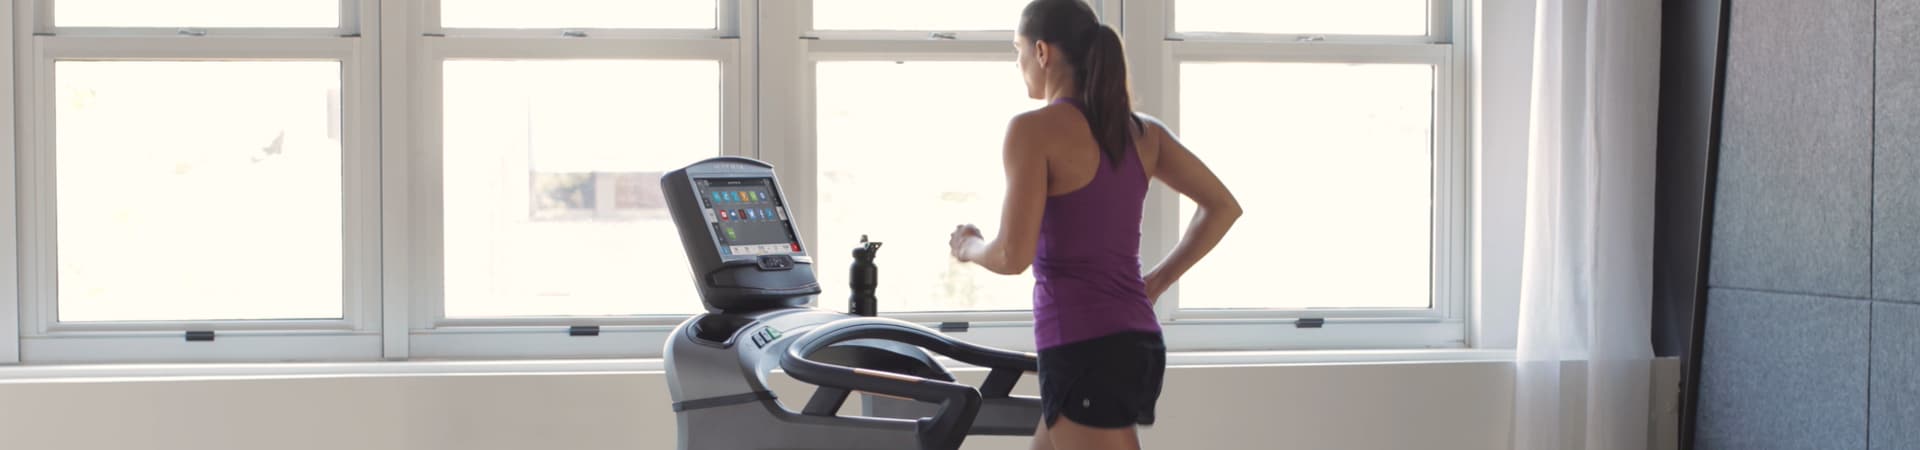 A woman is running on a treadmill